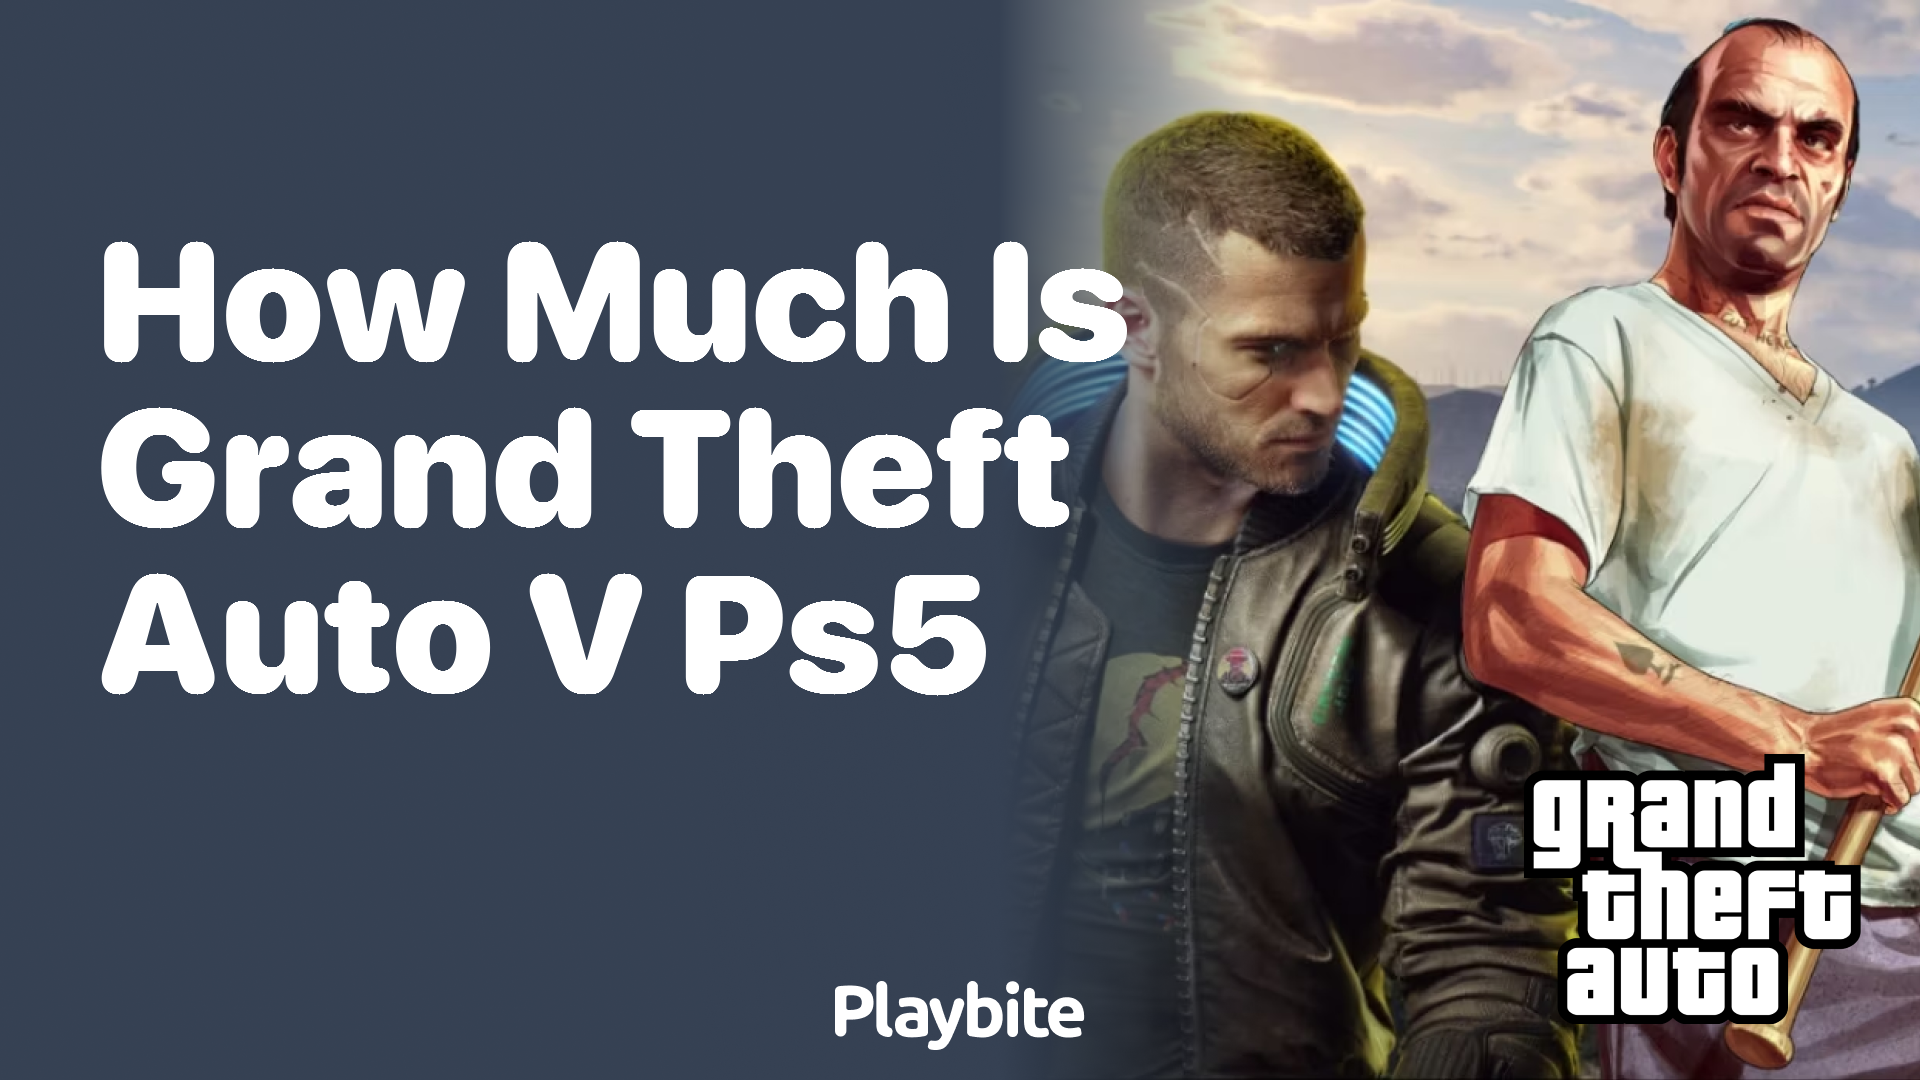 How much is Grand Theft Auto V on PS5?